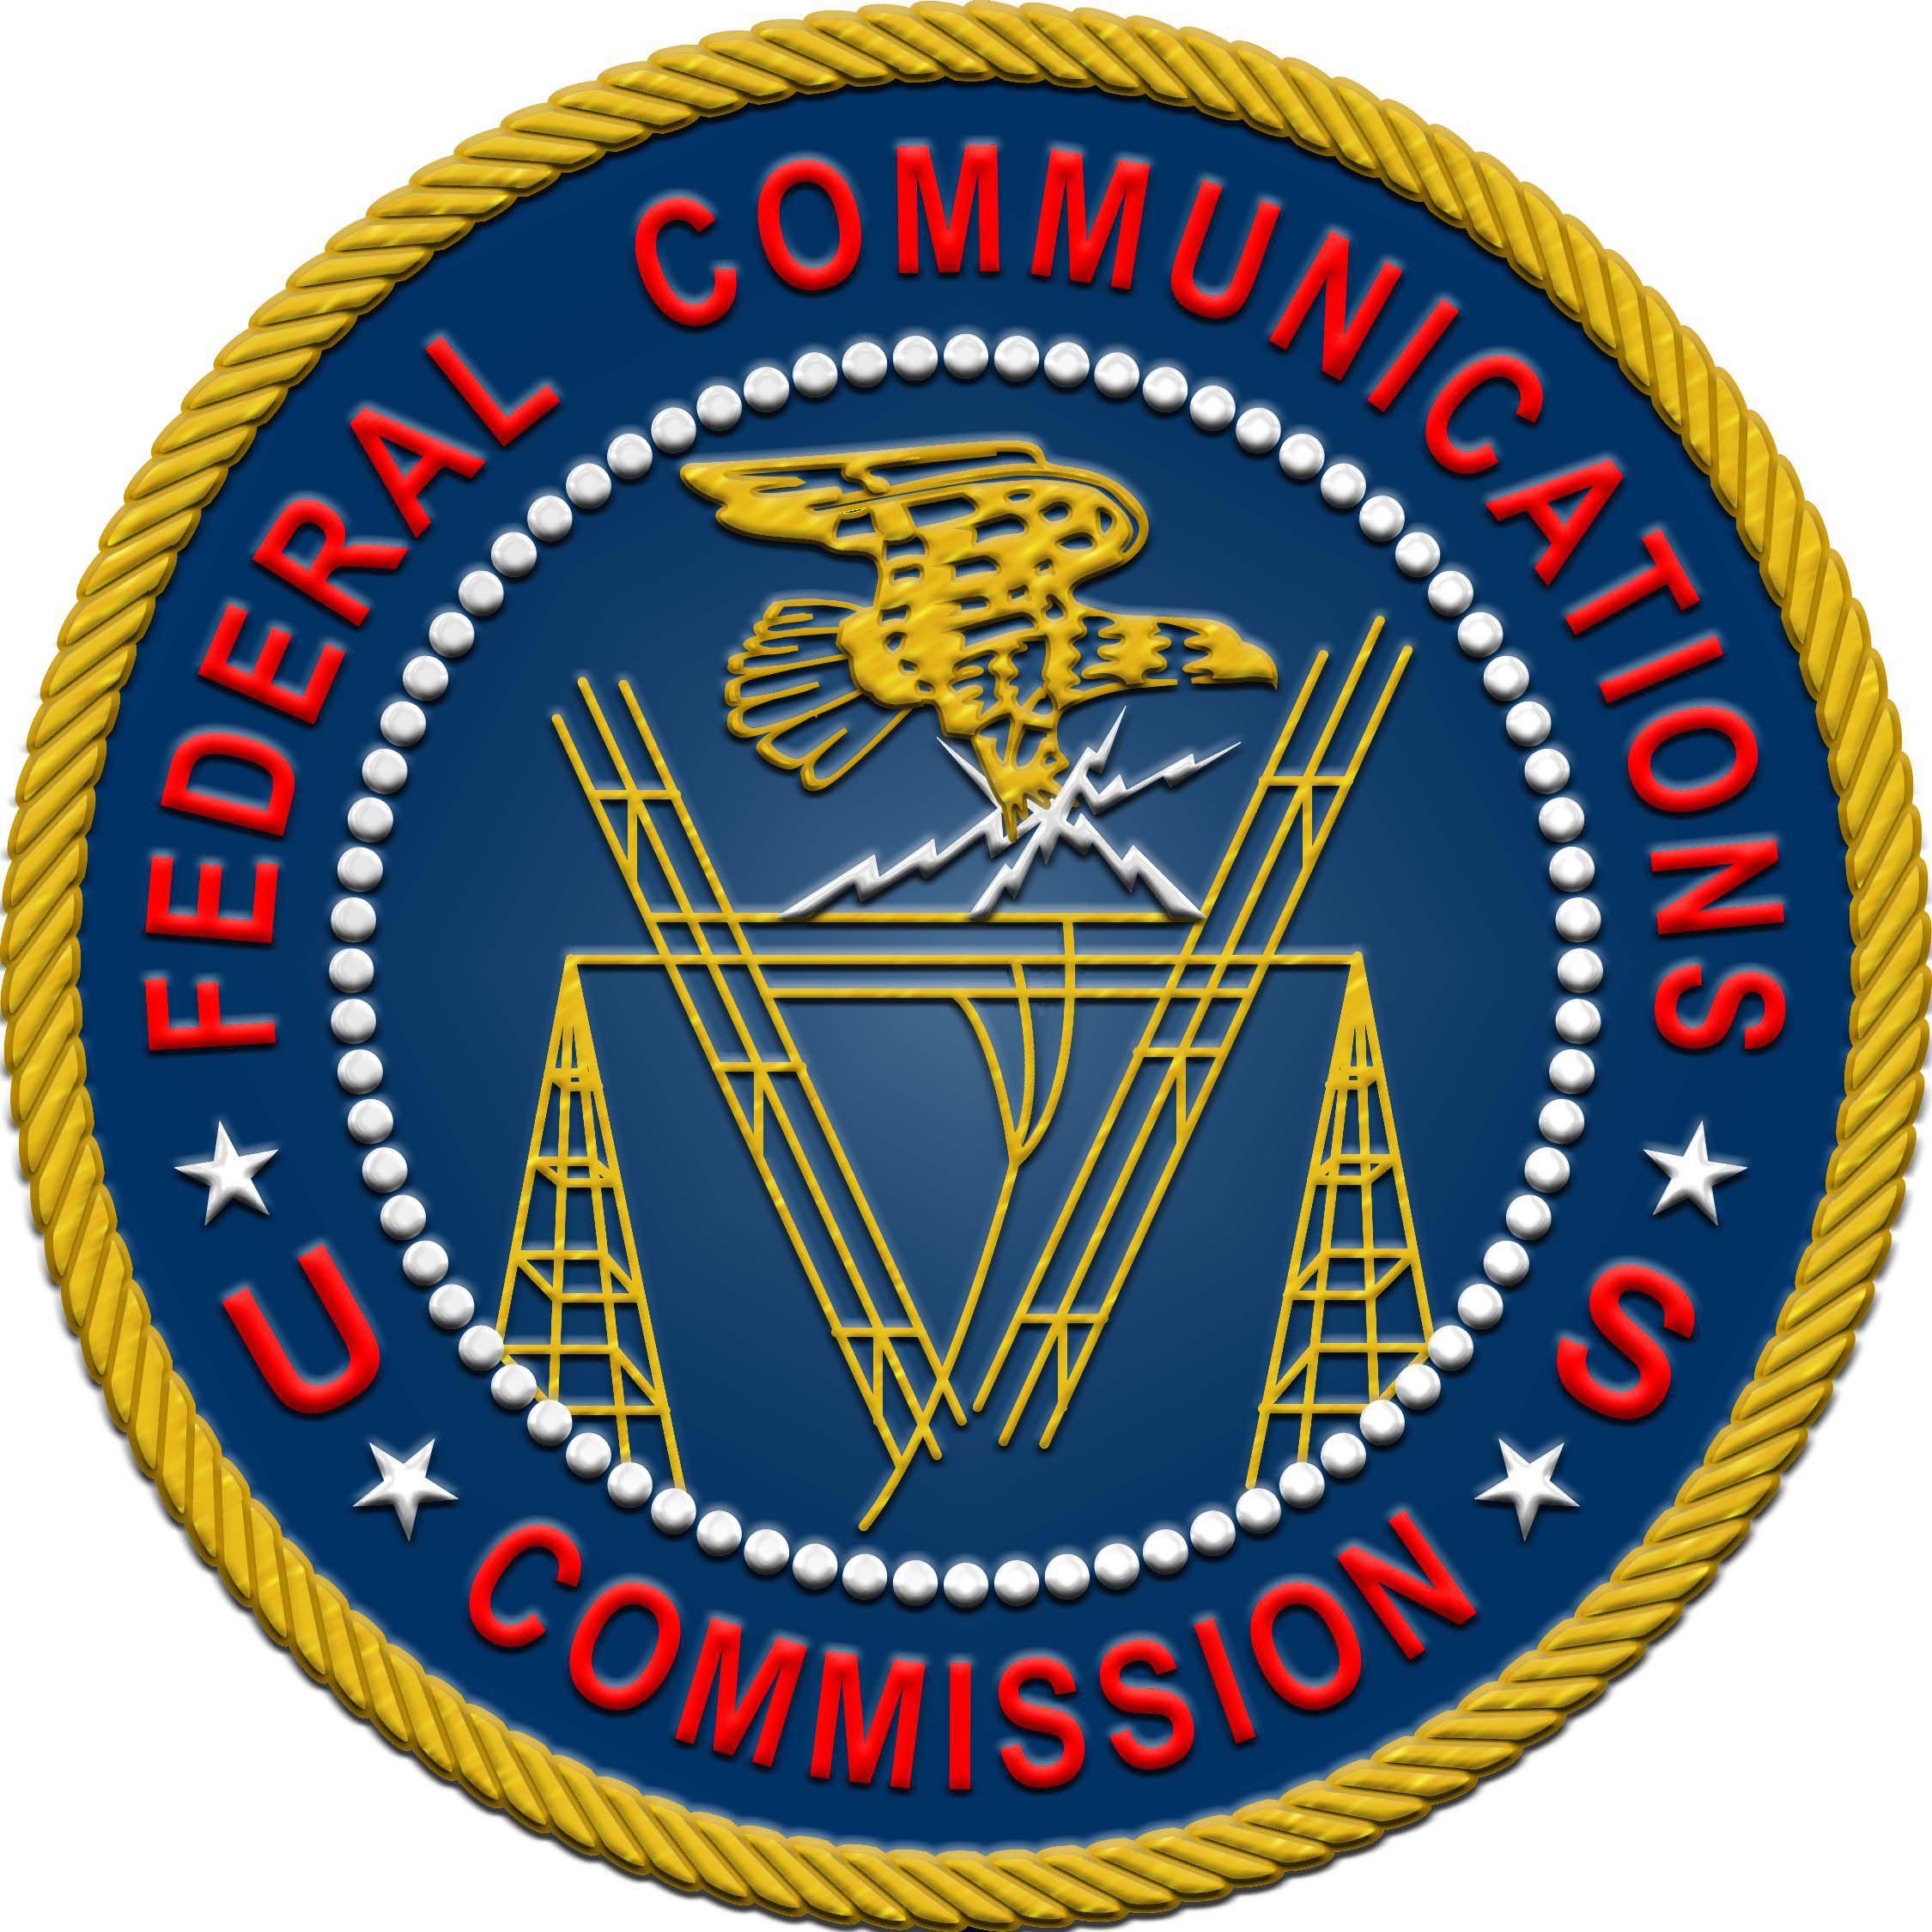 FCC Logo - Logos of the FCC. Federal Communications Commission